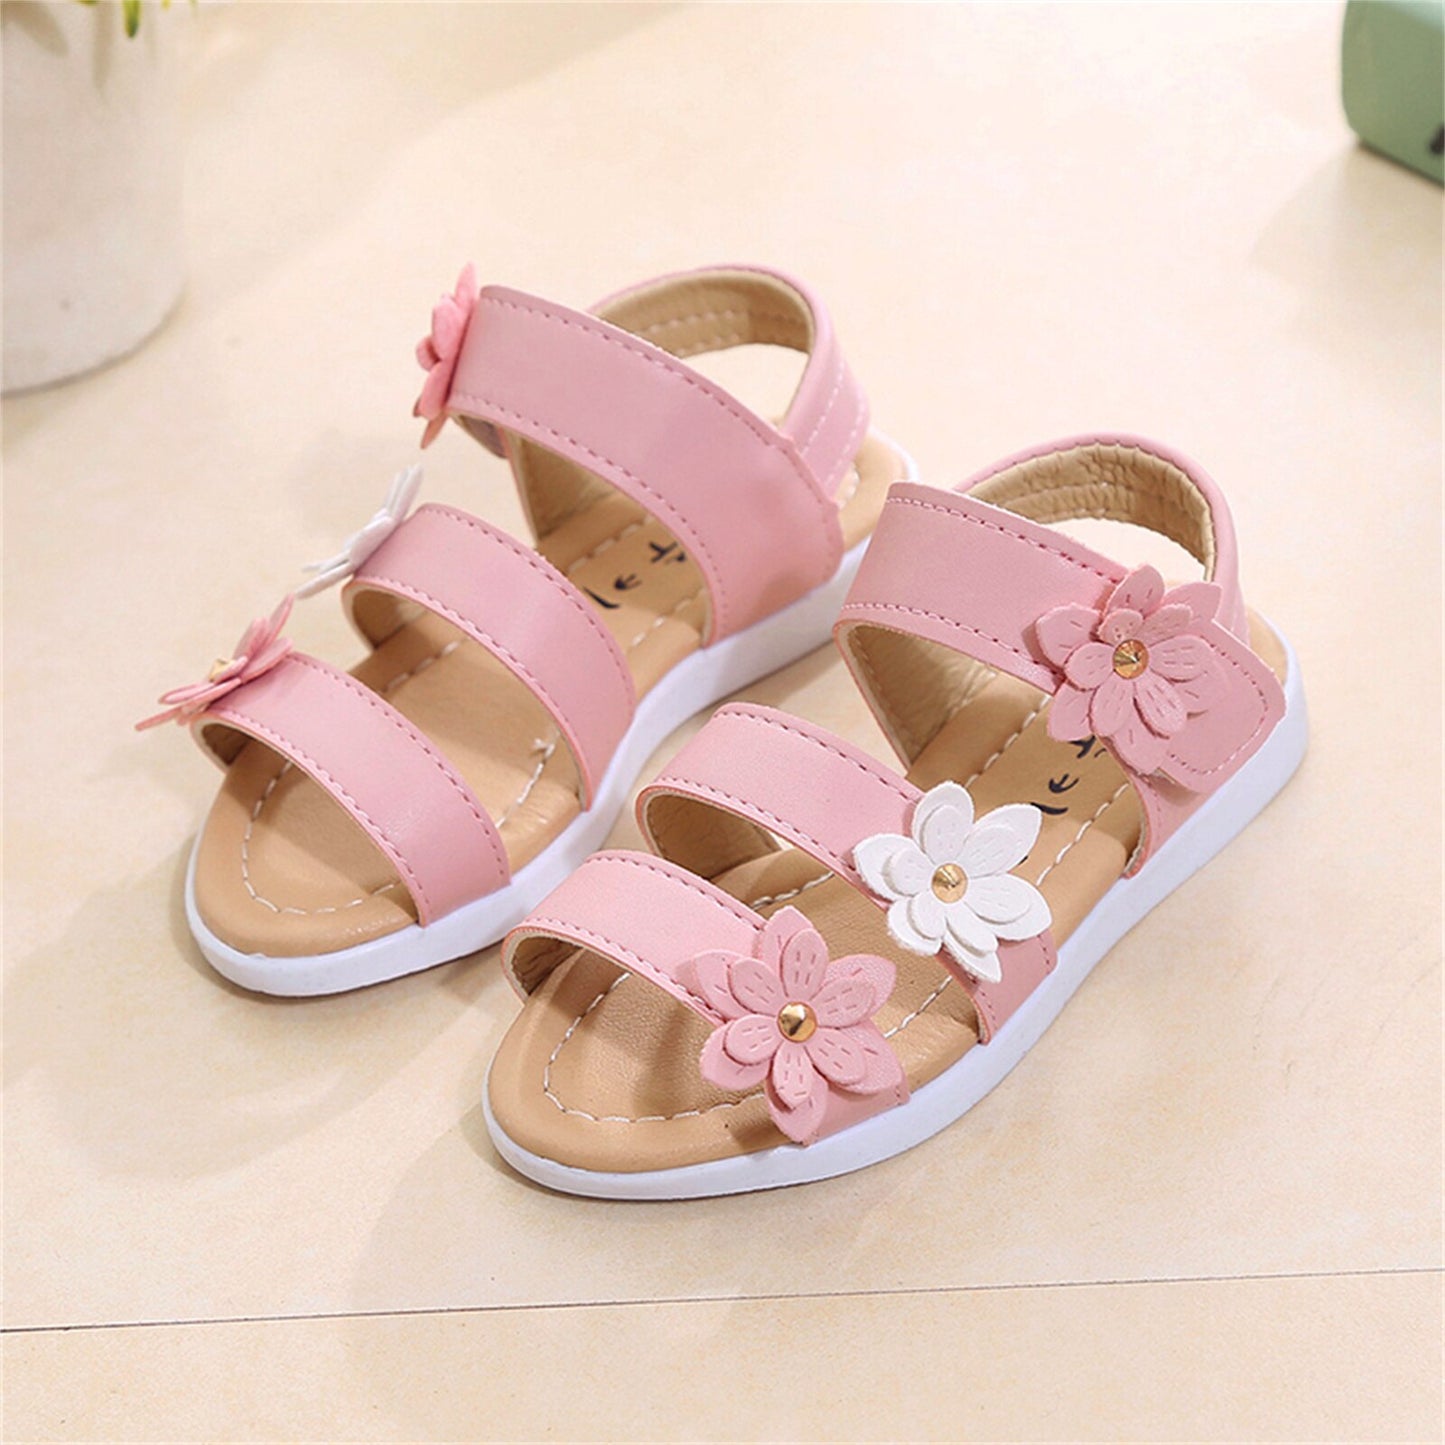 PatPat Toddler Girl Pretty Floral Decor Solid Sandals